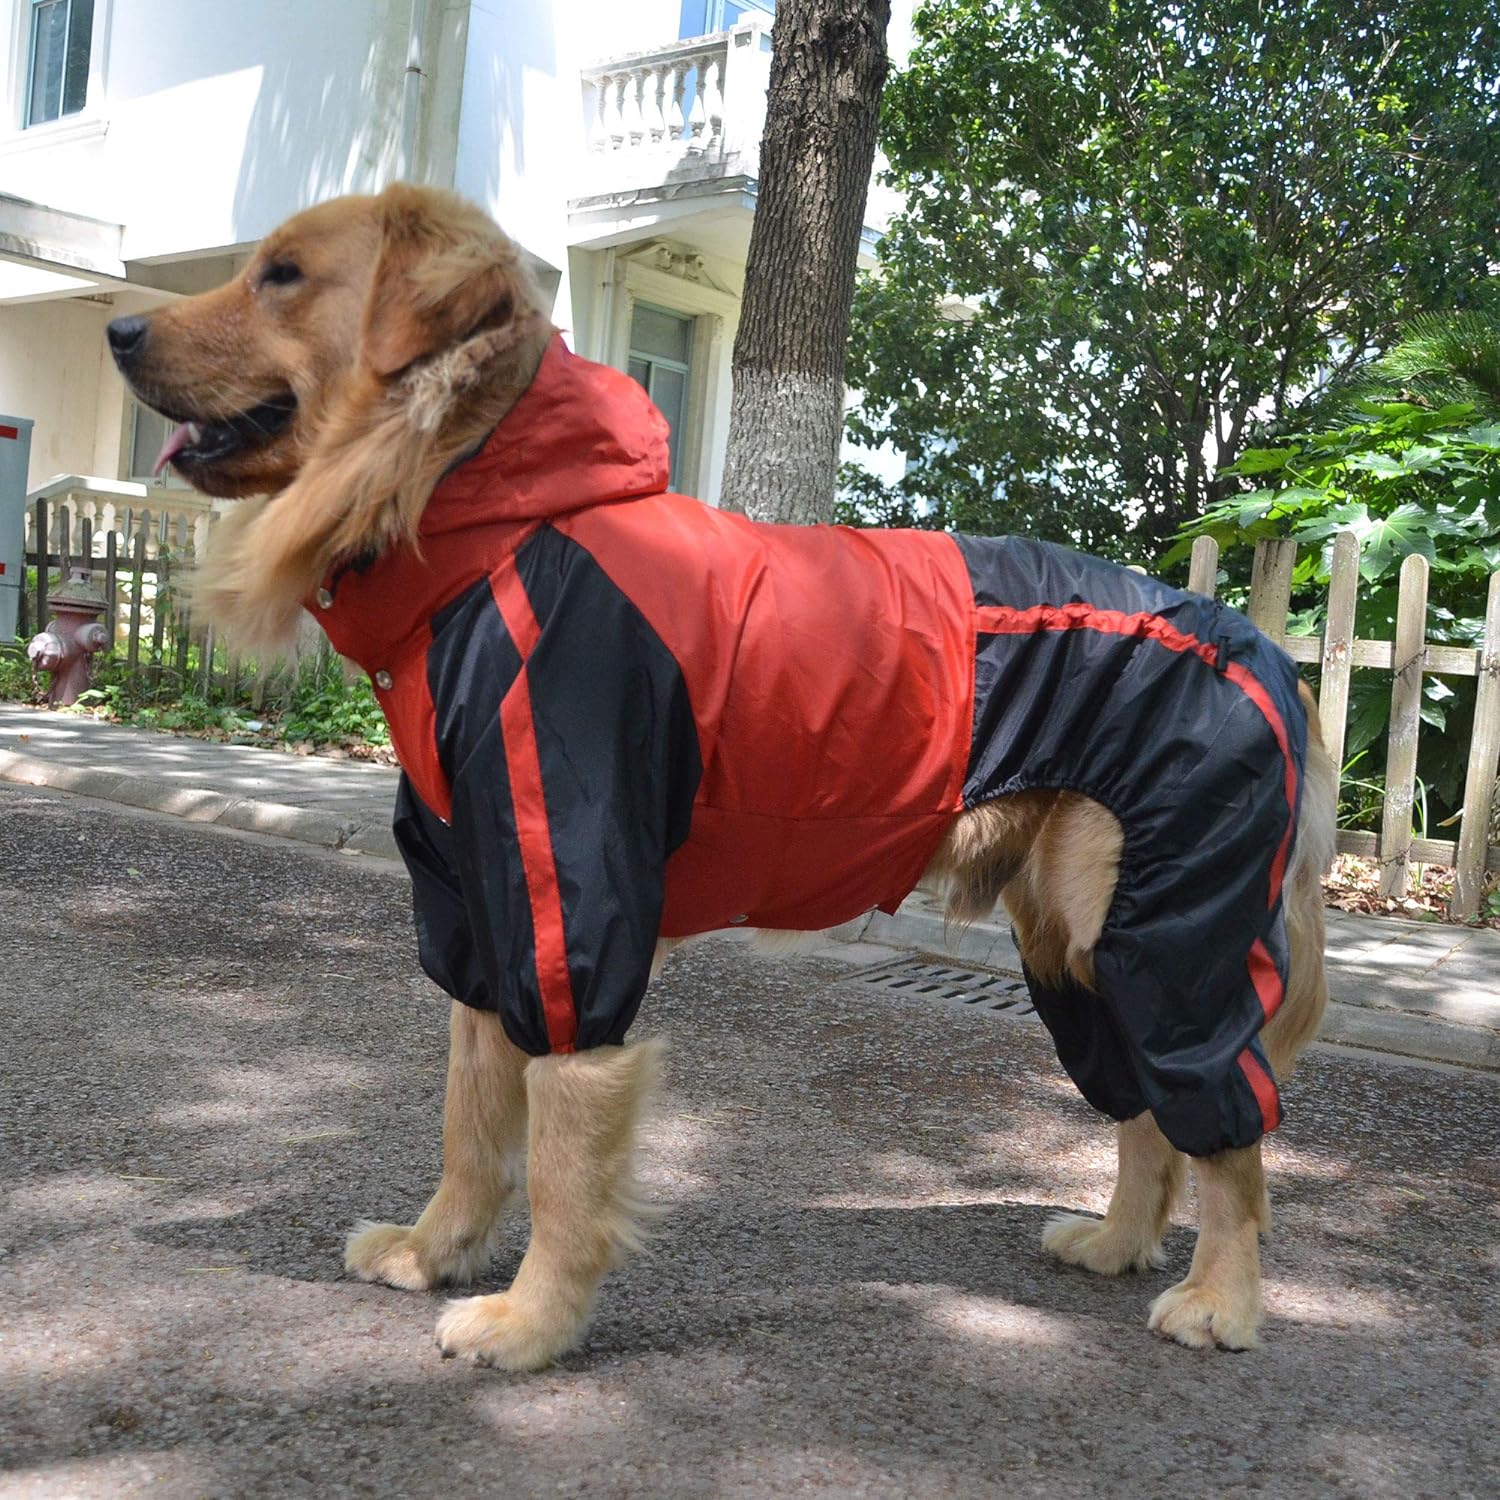 lovelonglong Dog Hooded Raincoat Small Dog Rain Jacket Poncho Waterproof Clothes with Hood Breathable 4 Feet Four Legs Rain Coats for Small Medium Large Pet Dogs Red XL